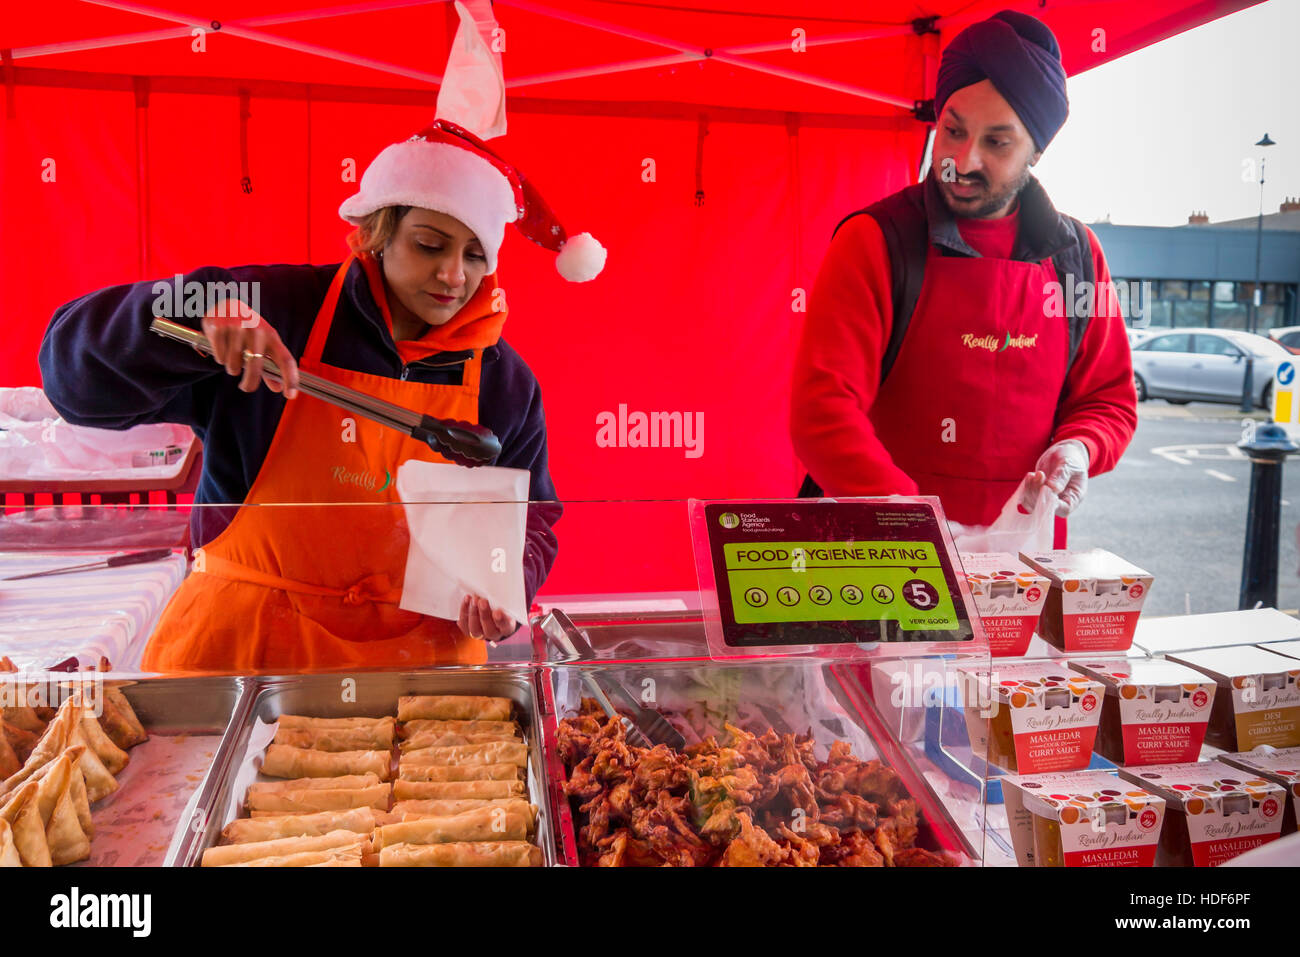 A man and woman Sikh  stall holders at a UK Christmas farmer's market serving Curry Sauces and cooked 'Really Indian' food Stock Photo